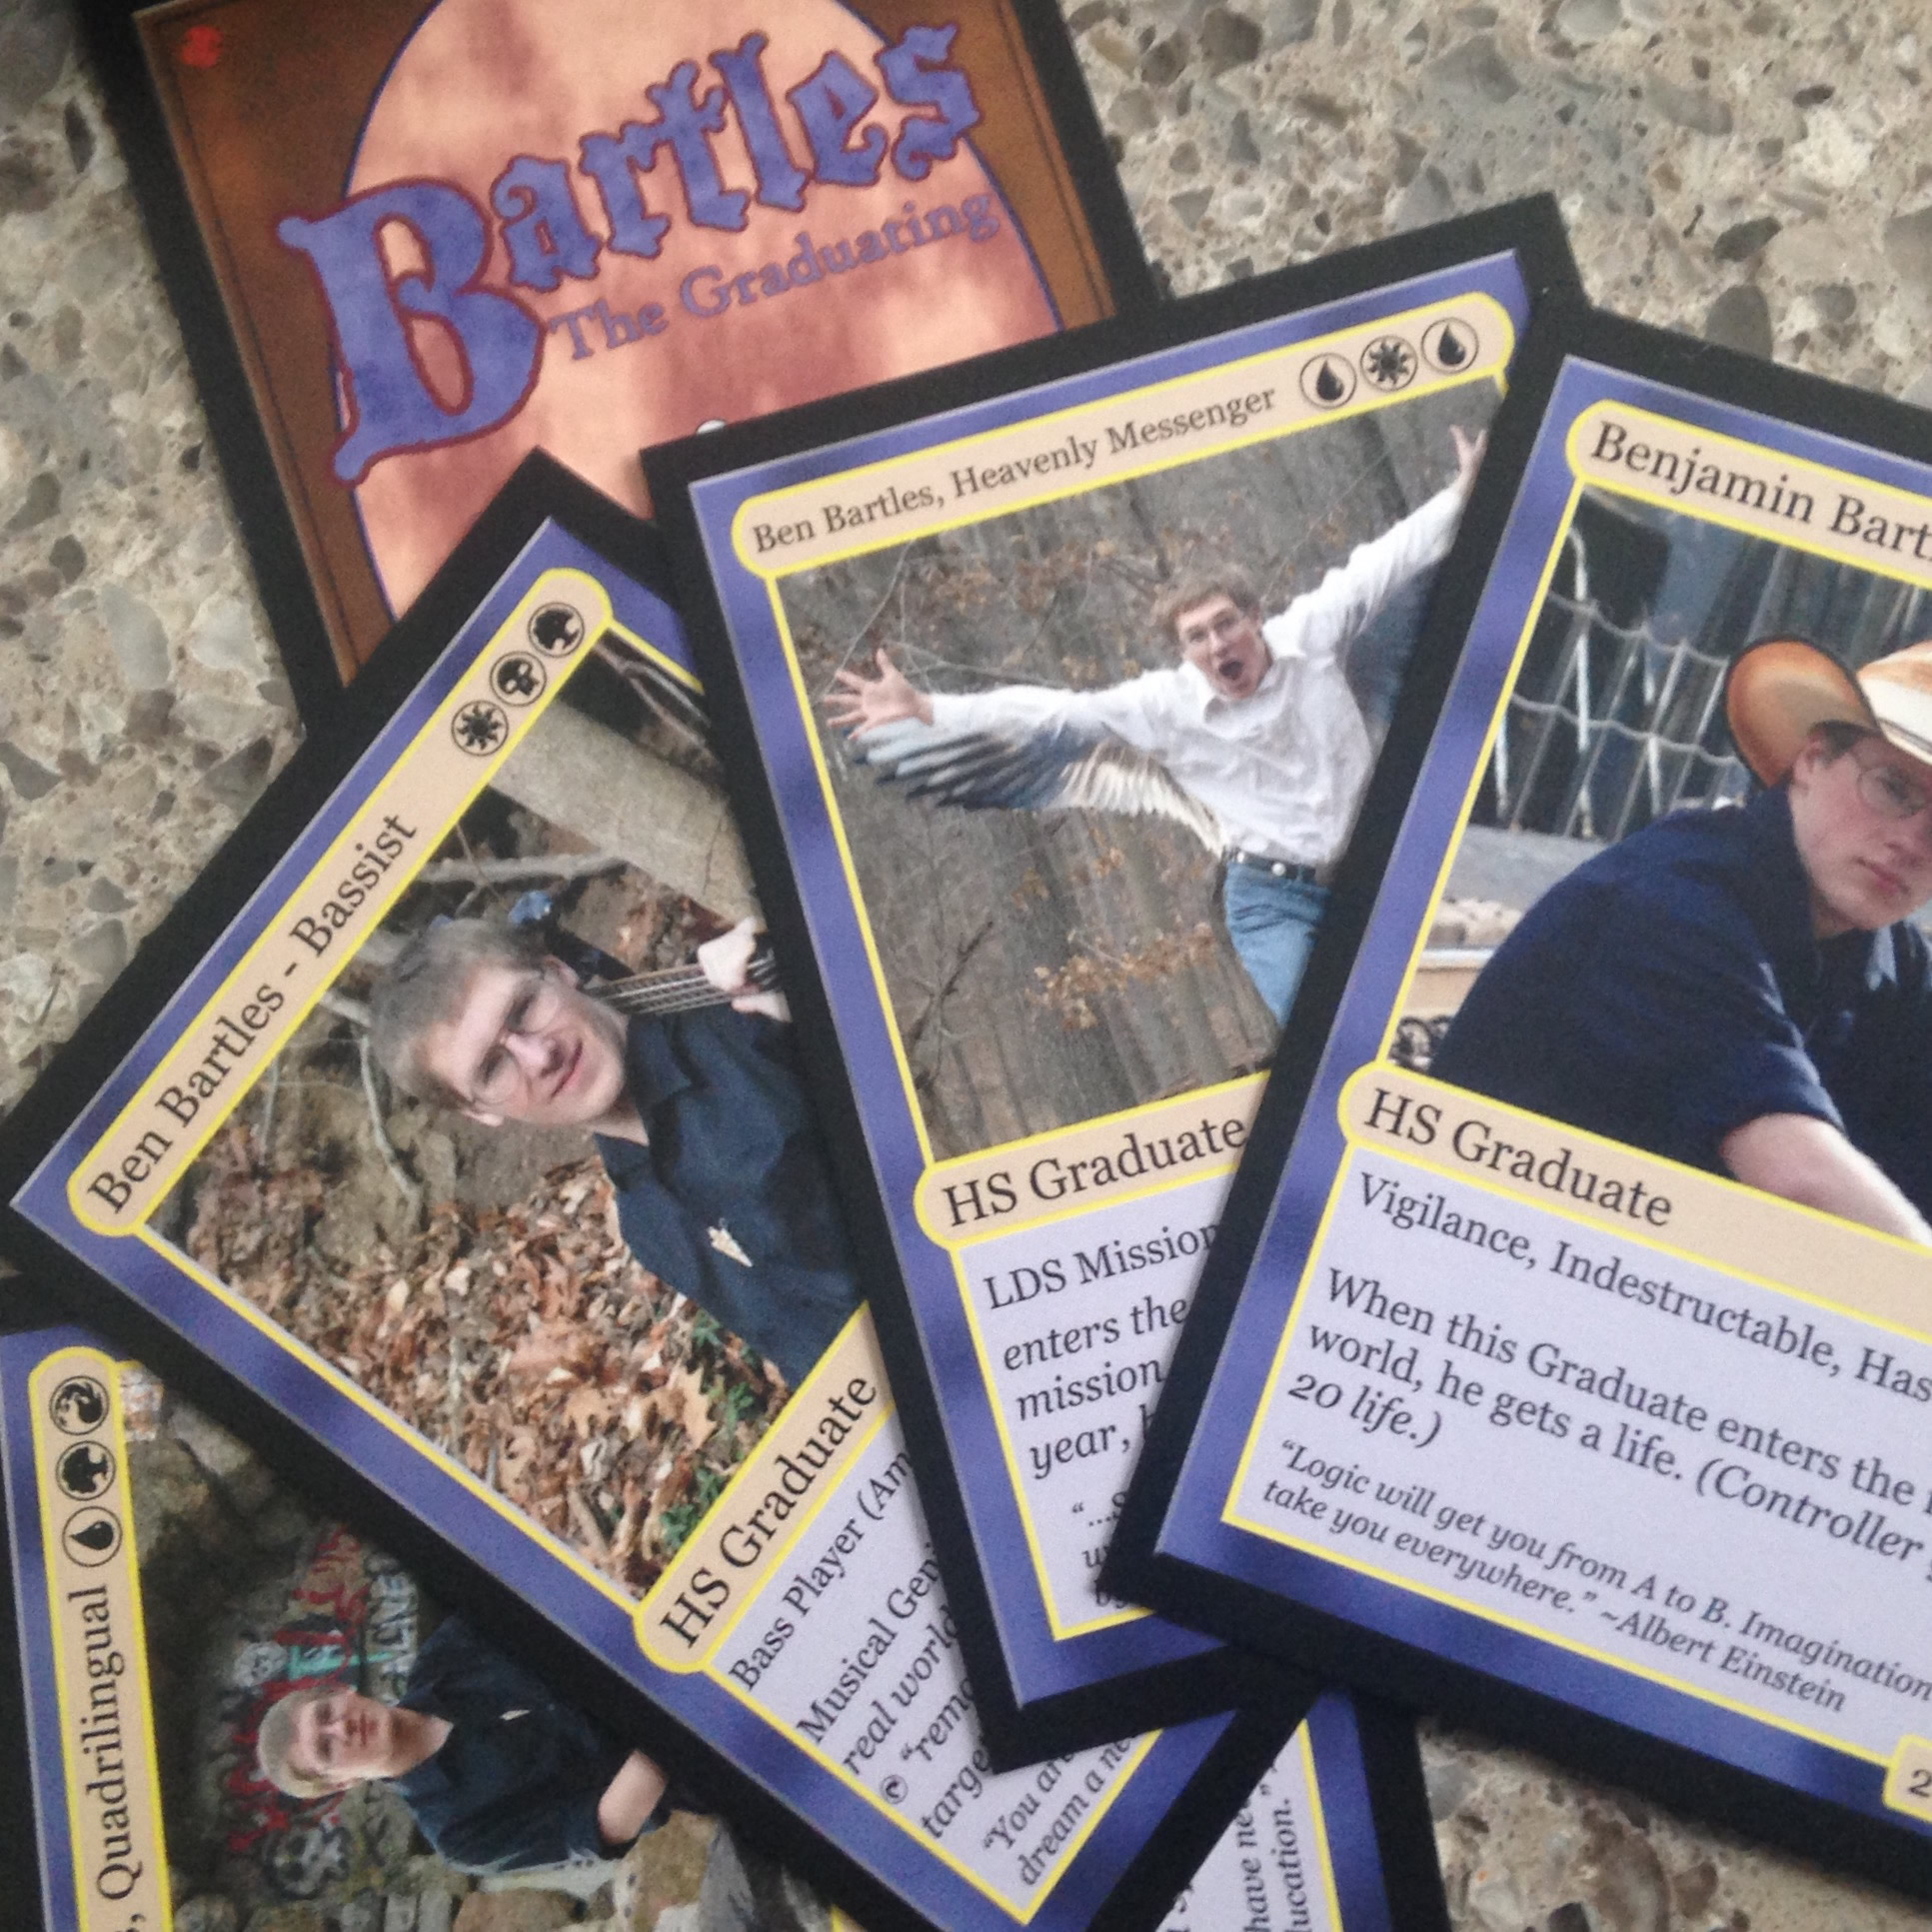 Bartles the Graduating - Trading card spoof on Magic, the Gathering cards